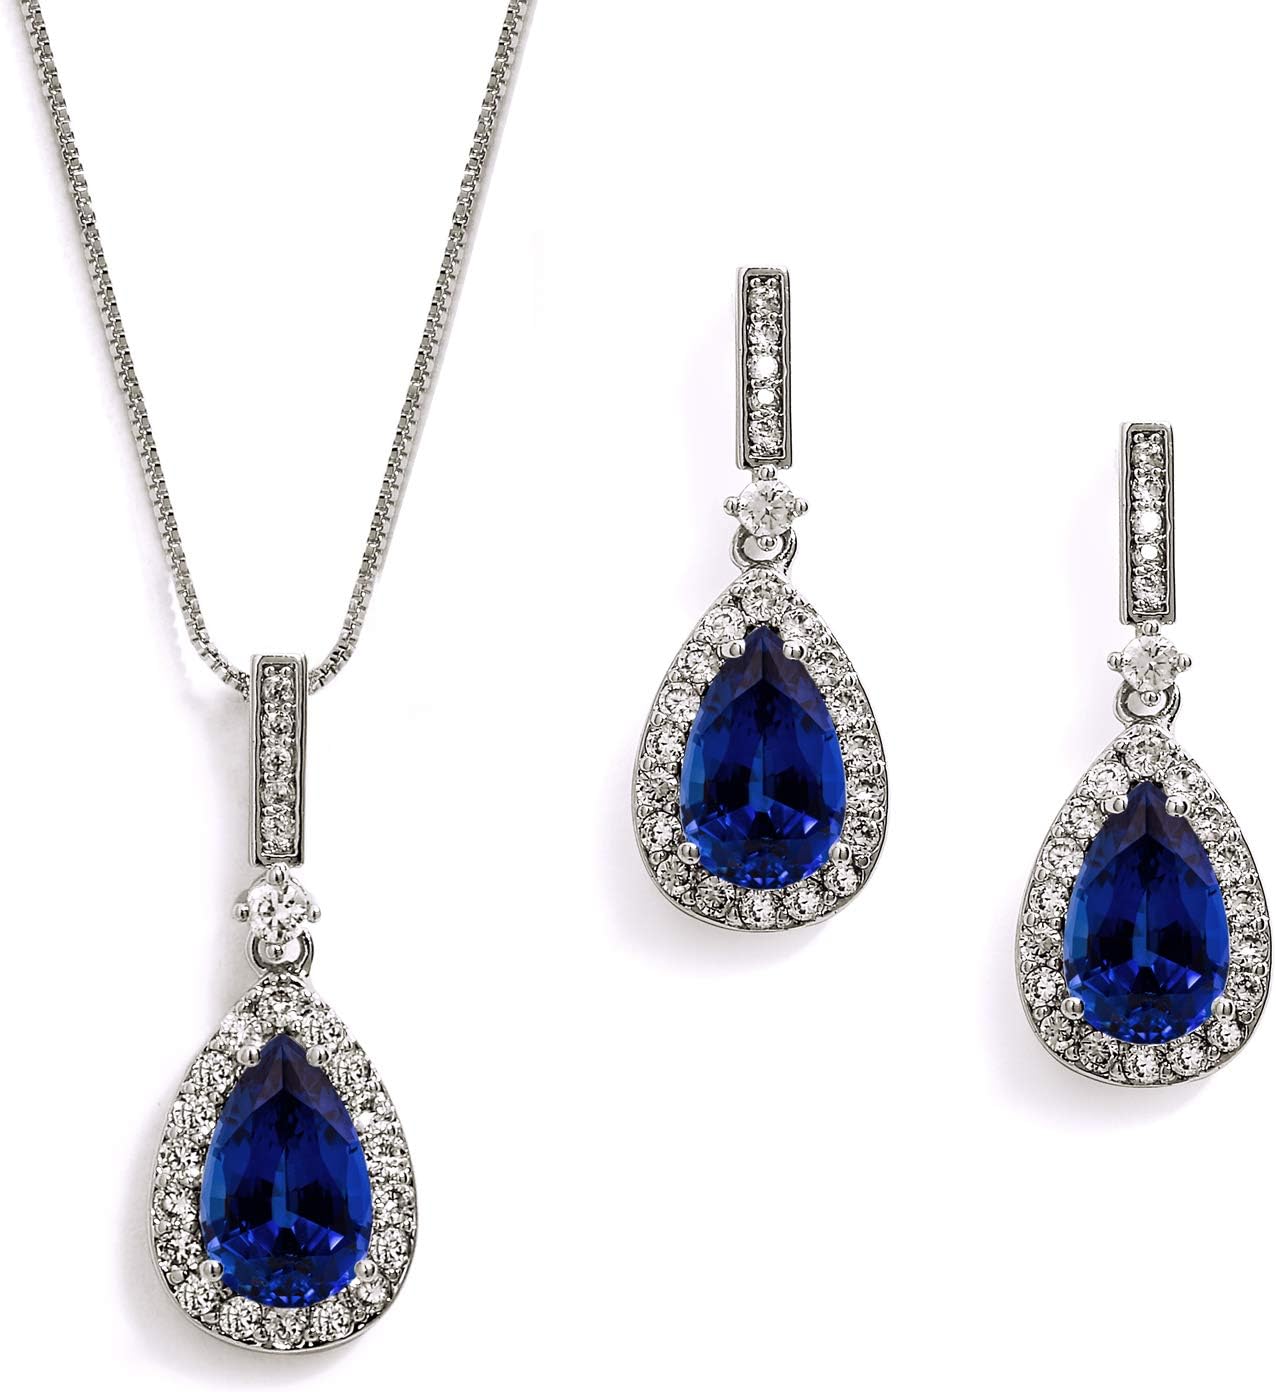 Mariell Bridal Wedding Necklace and Earring Set, Sapphire Blue CZ Pendant and Drop Earrings for Brides